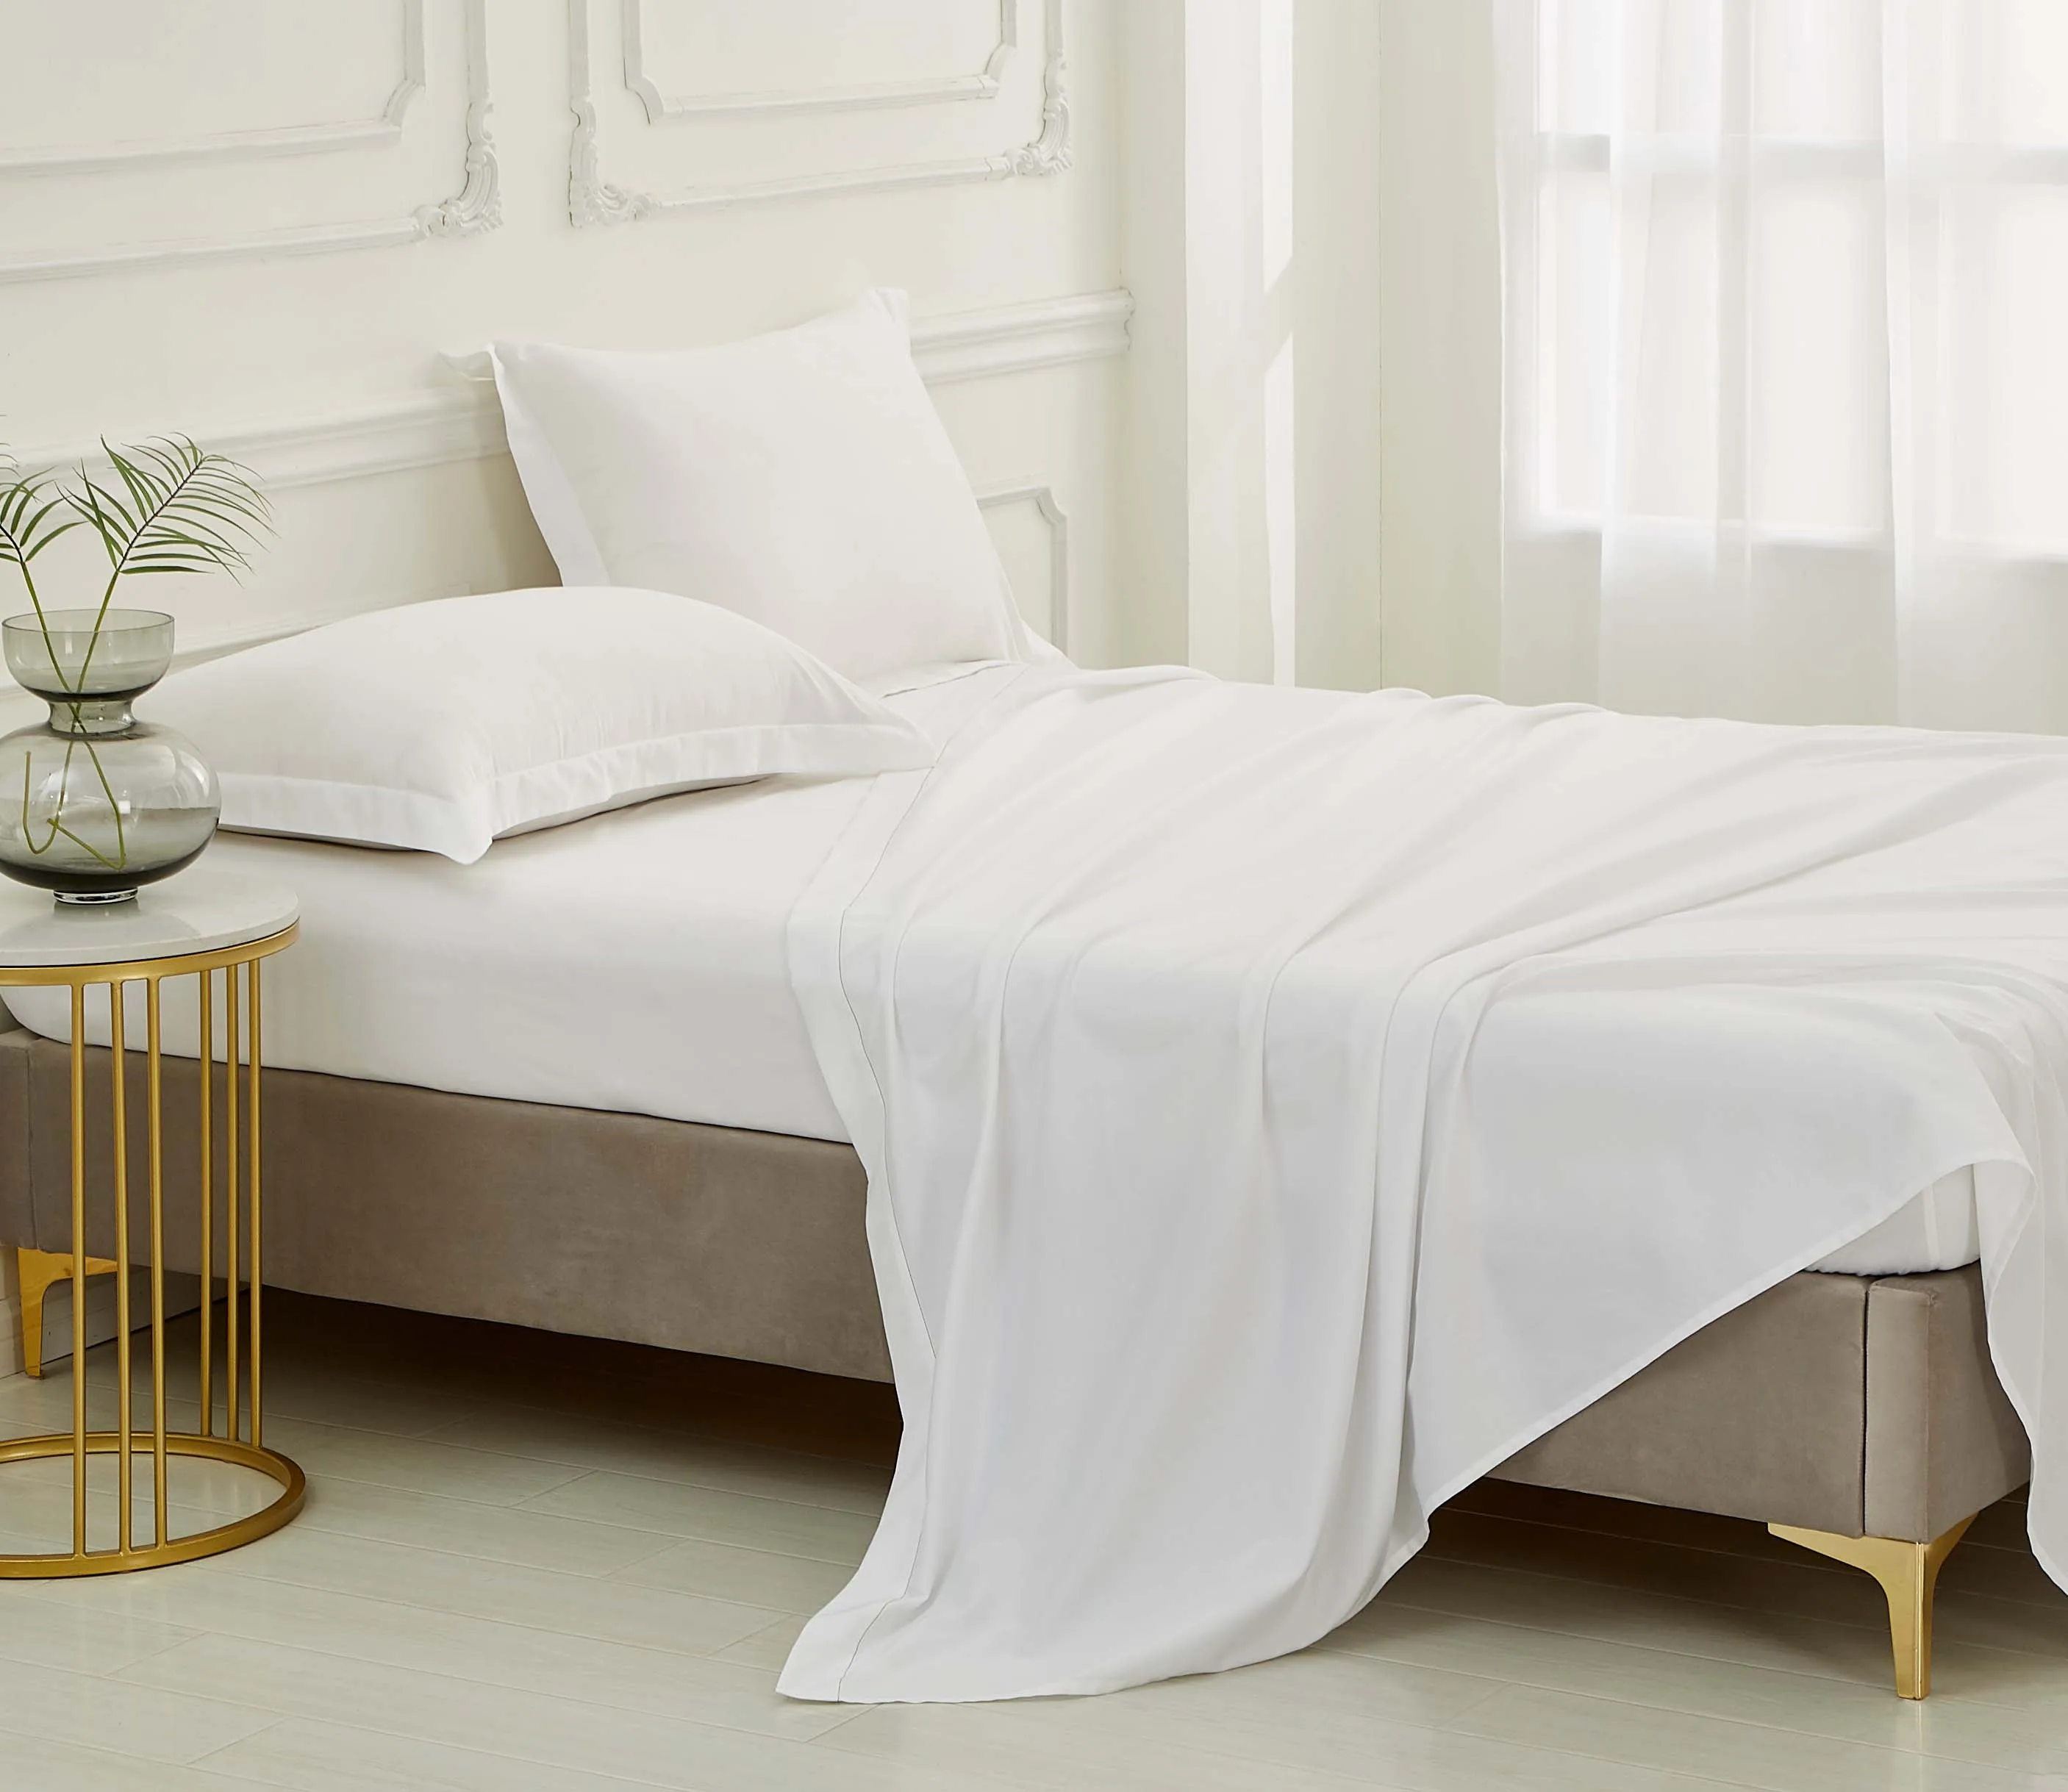 show original title Details about   Luxury Flat Plate Hotel Quality 100% Egyptian Cotton 400 Thread Count Bed 